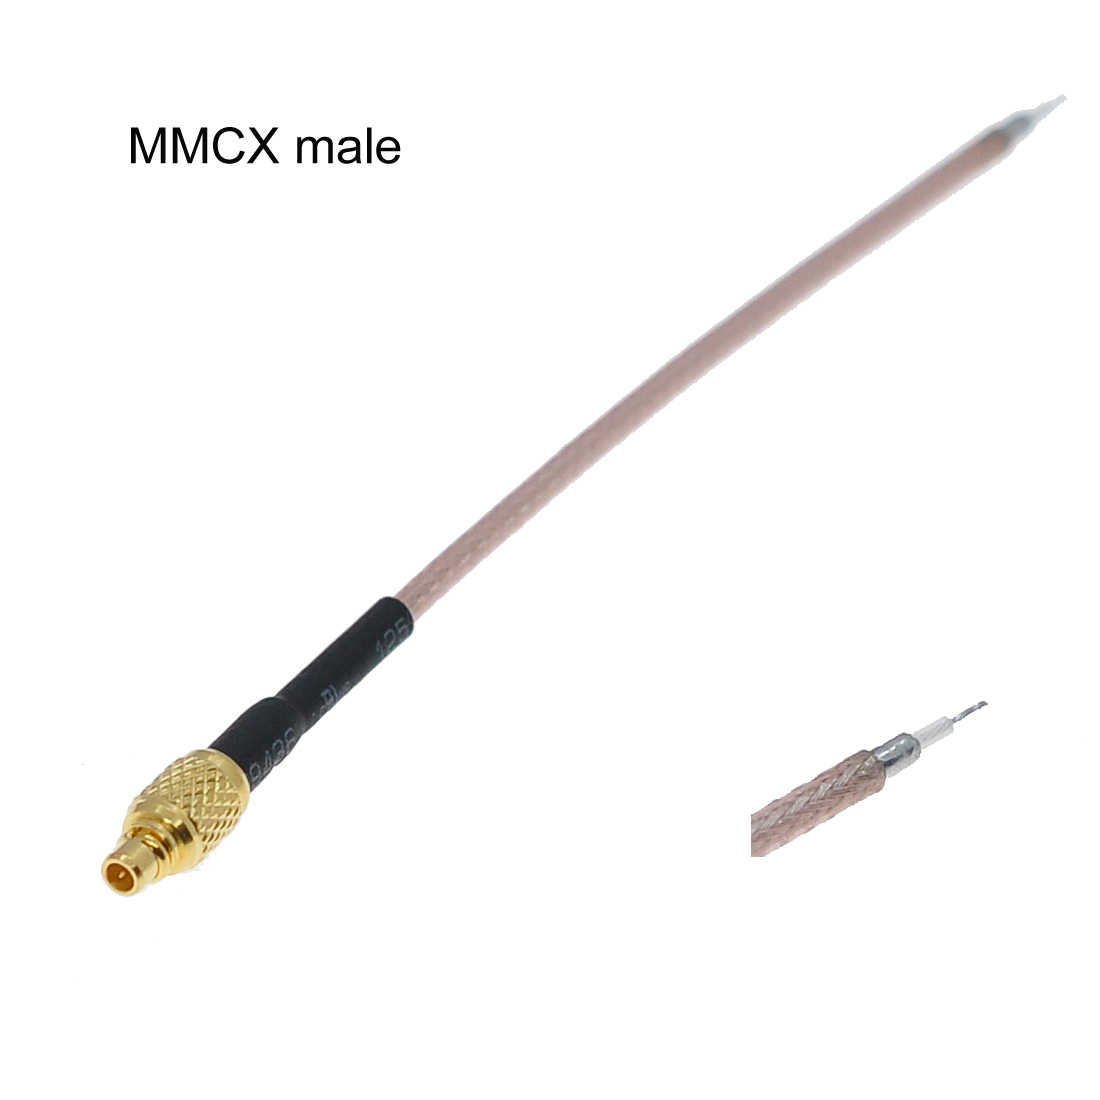 High quality MMCX Straight male plug pigtail cable with RG178 cable custom-build total length and ends